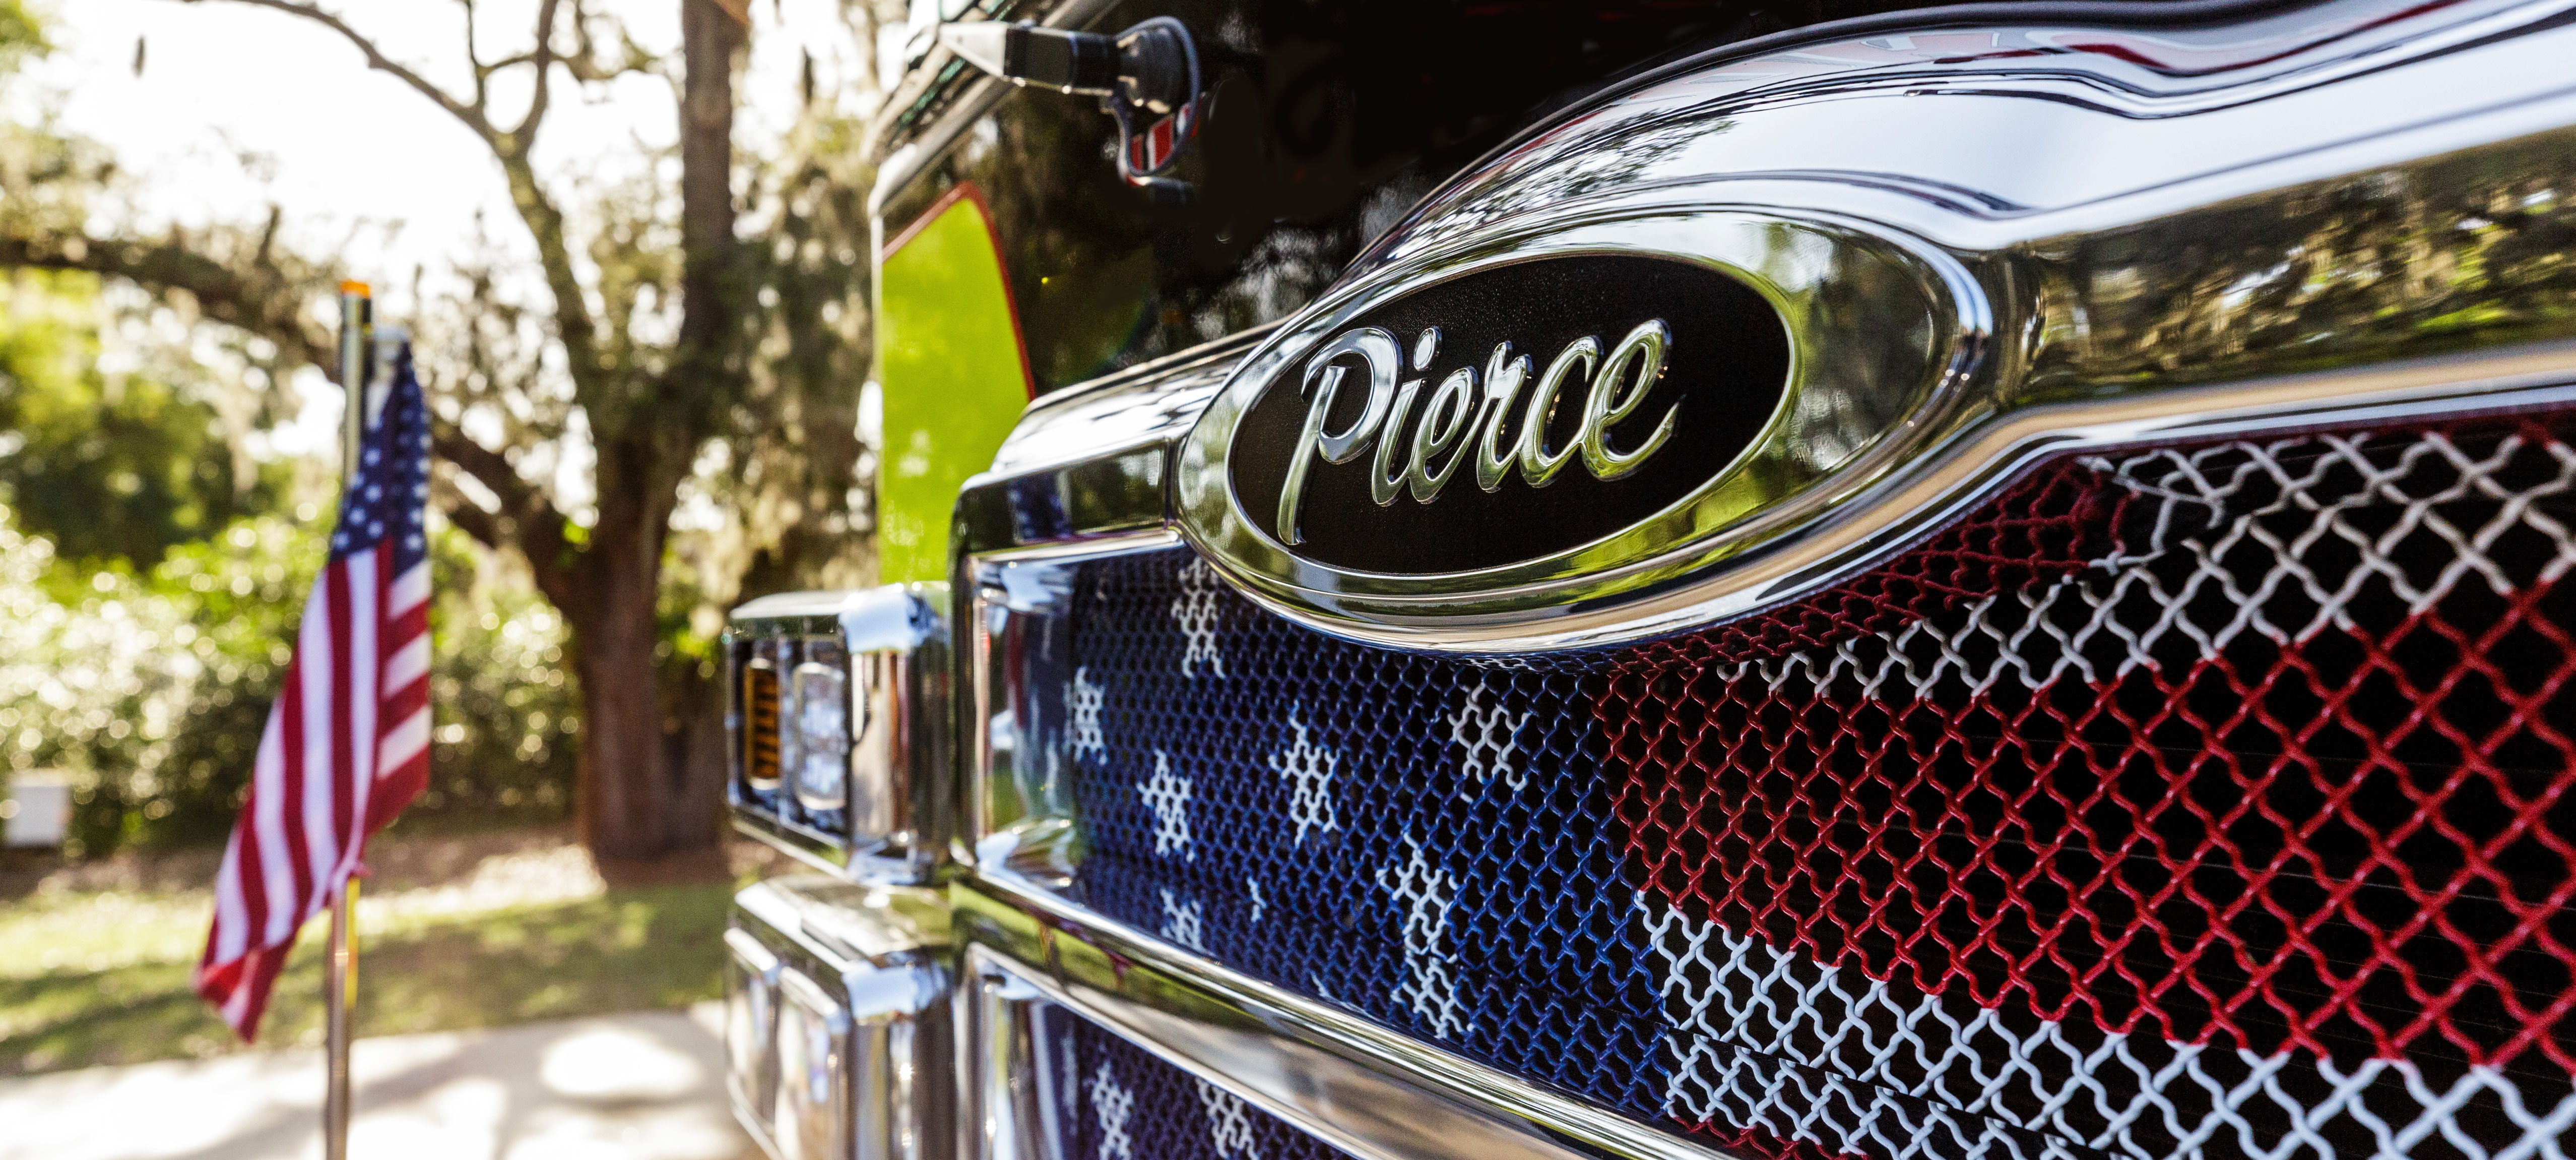 Pierce Fire Truck parked outside on a sunny day near an American flag with a close up of the front bumper logo.